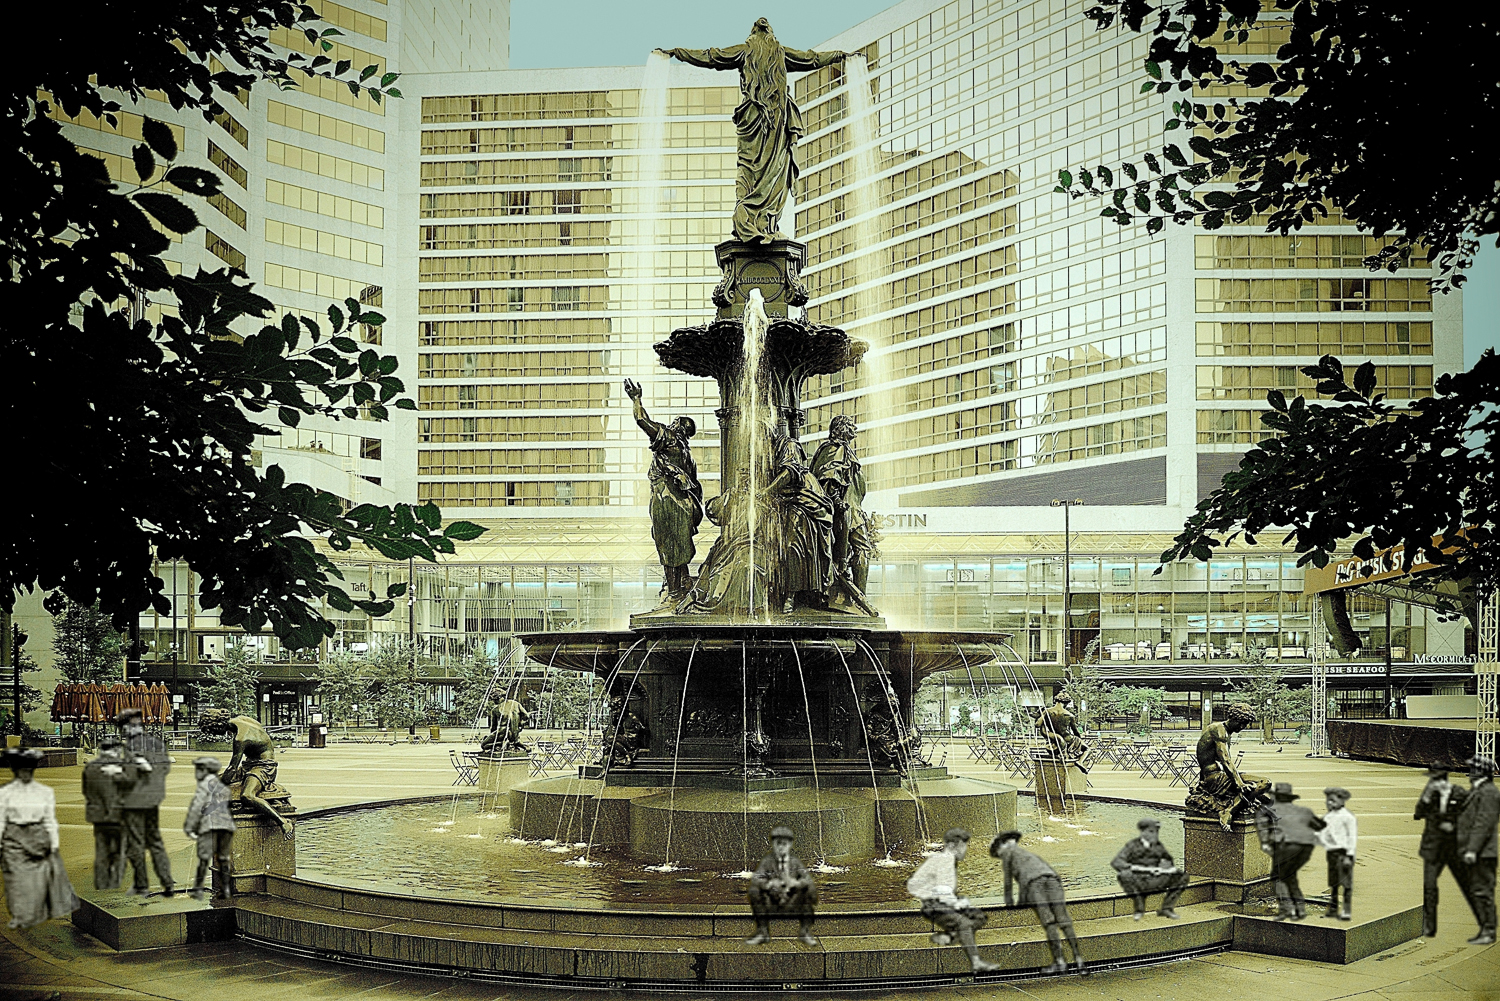 Erce Gokhan, Fountain Square- Genius of Water, 2013 & 1906. Photograph, 12 x 8 inches. Courtesy of the artist